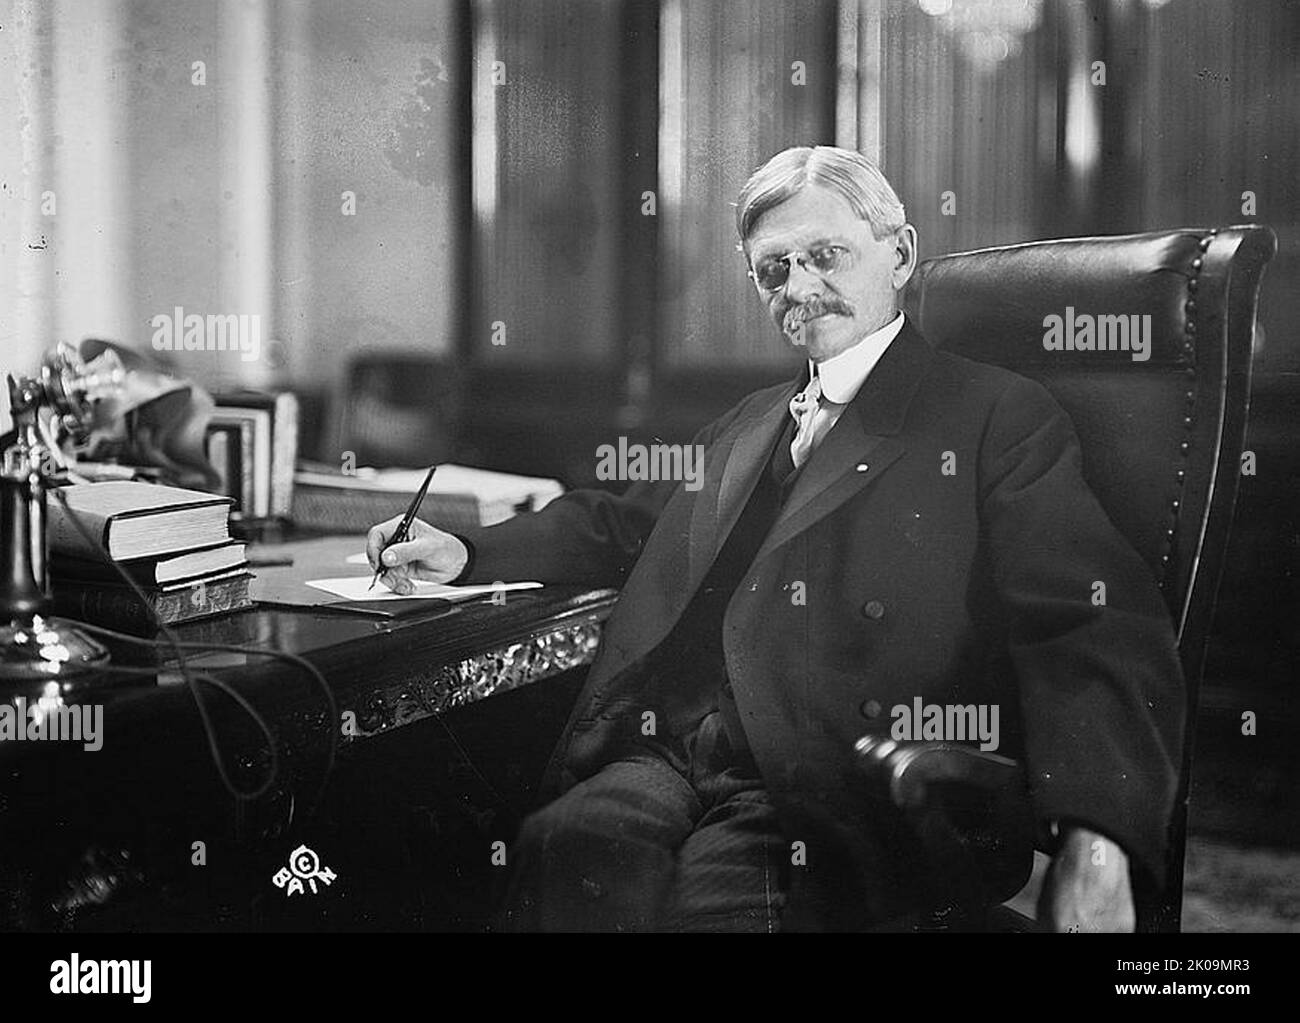 Thomas Riley Marshall (1854 - 1925) American politician who served as the 28th vice president of the United States from 1913 to 1921 under President Woodrow Wilson. A prominent lawyer in Indiana, he became an active and well known member of the Democratic Party. Stock Photo